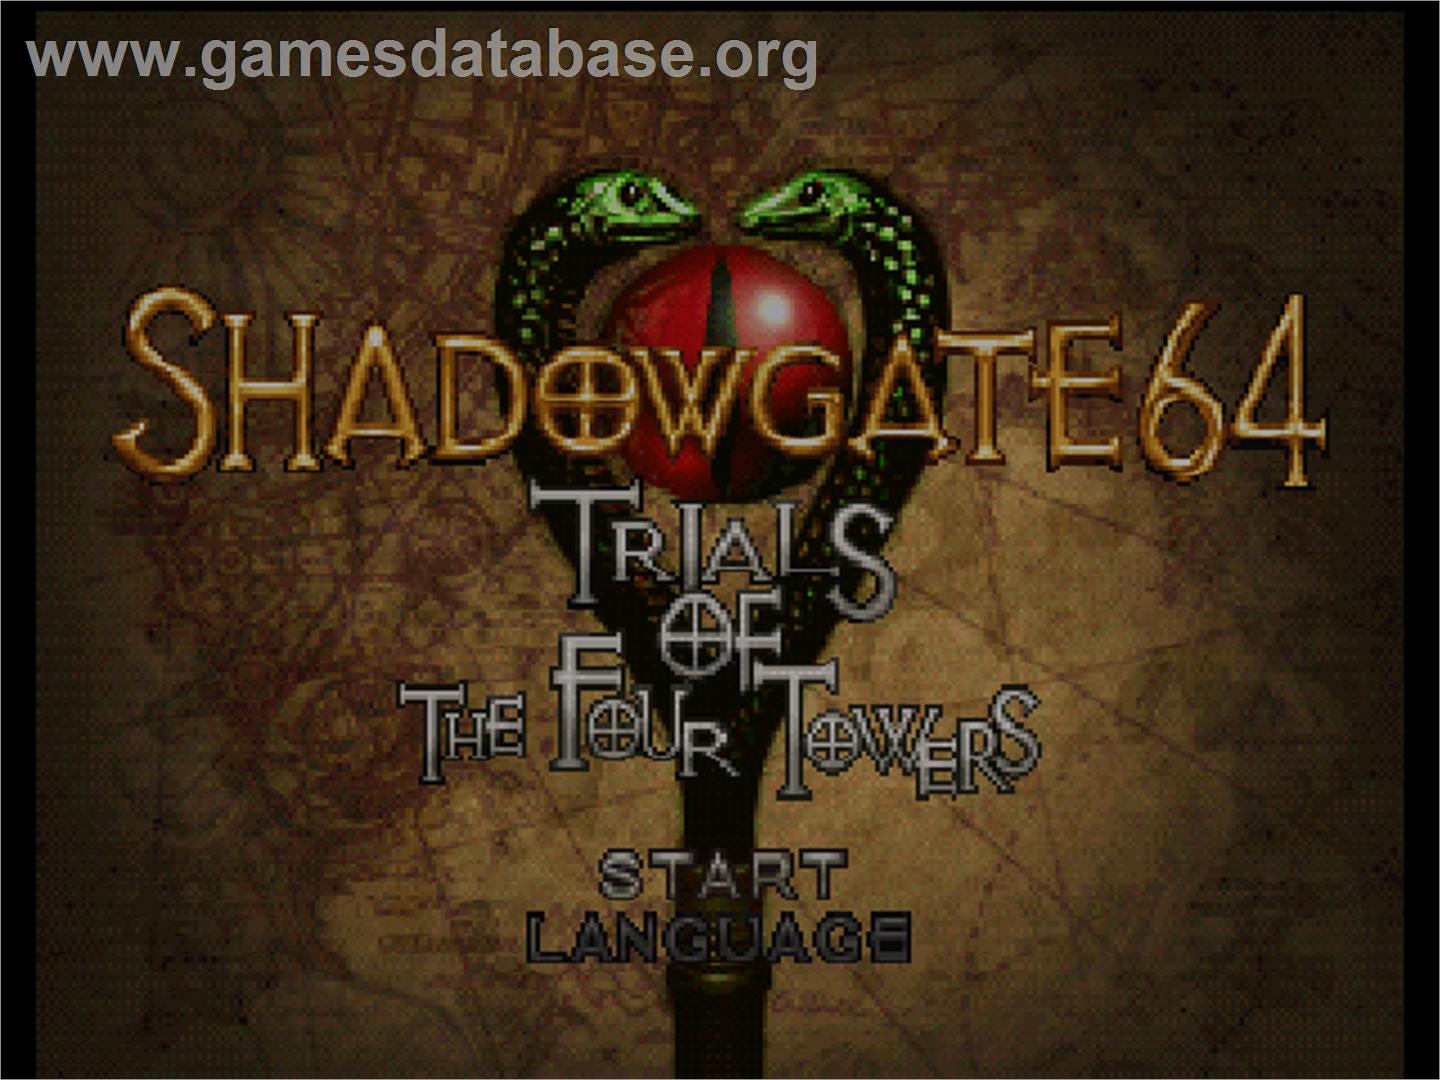 Shadowgate 64: The Trials of the Four Towers - Nintendo N64 - Artwork - Title Screen